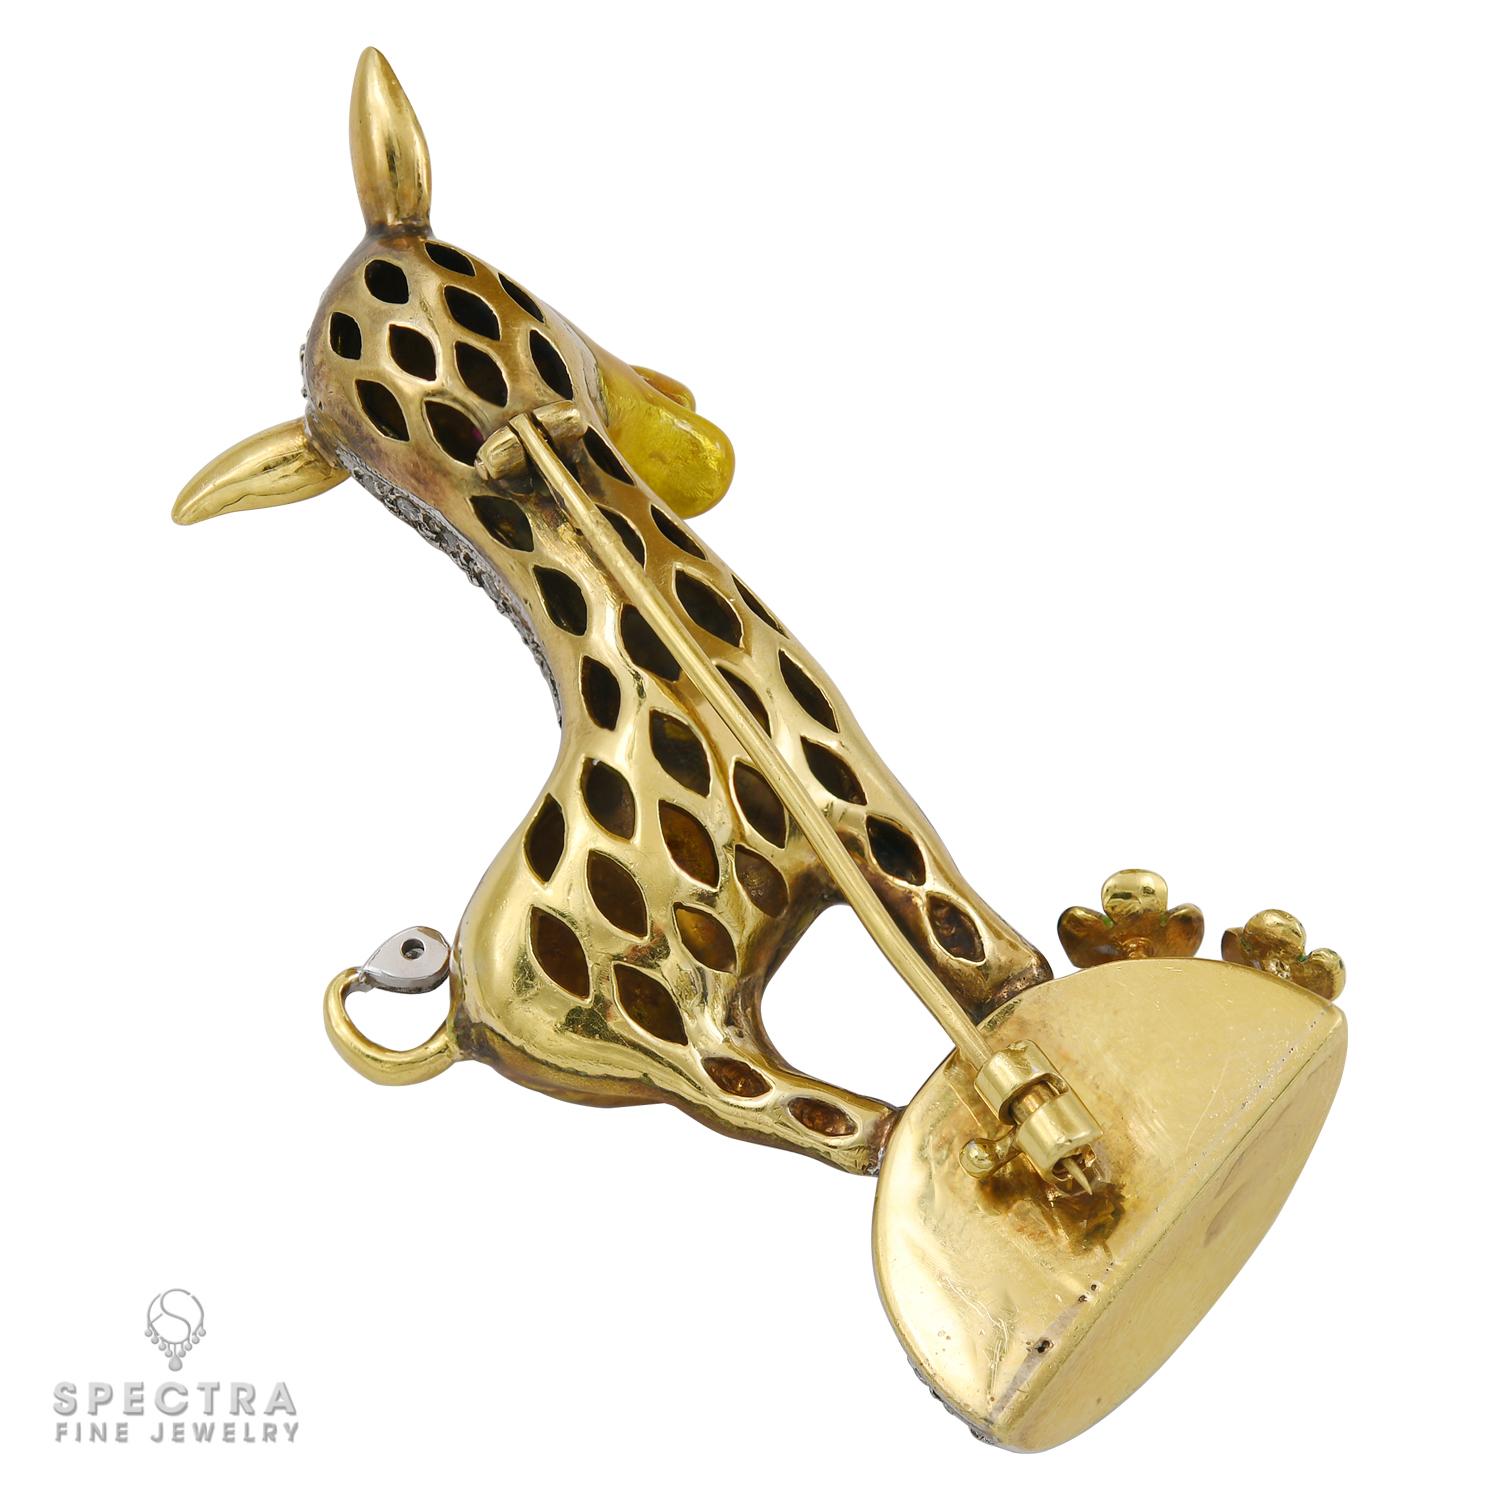 How could anyone resist such an expression from this horse-adjacent hoofed creature? Our four-legged friend has a disarmingly exuberant air as he stopped to pose for this Contemporary Enamel Diamond Figural Donkey Brooch in his likeness, made in the